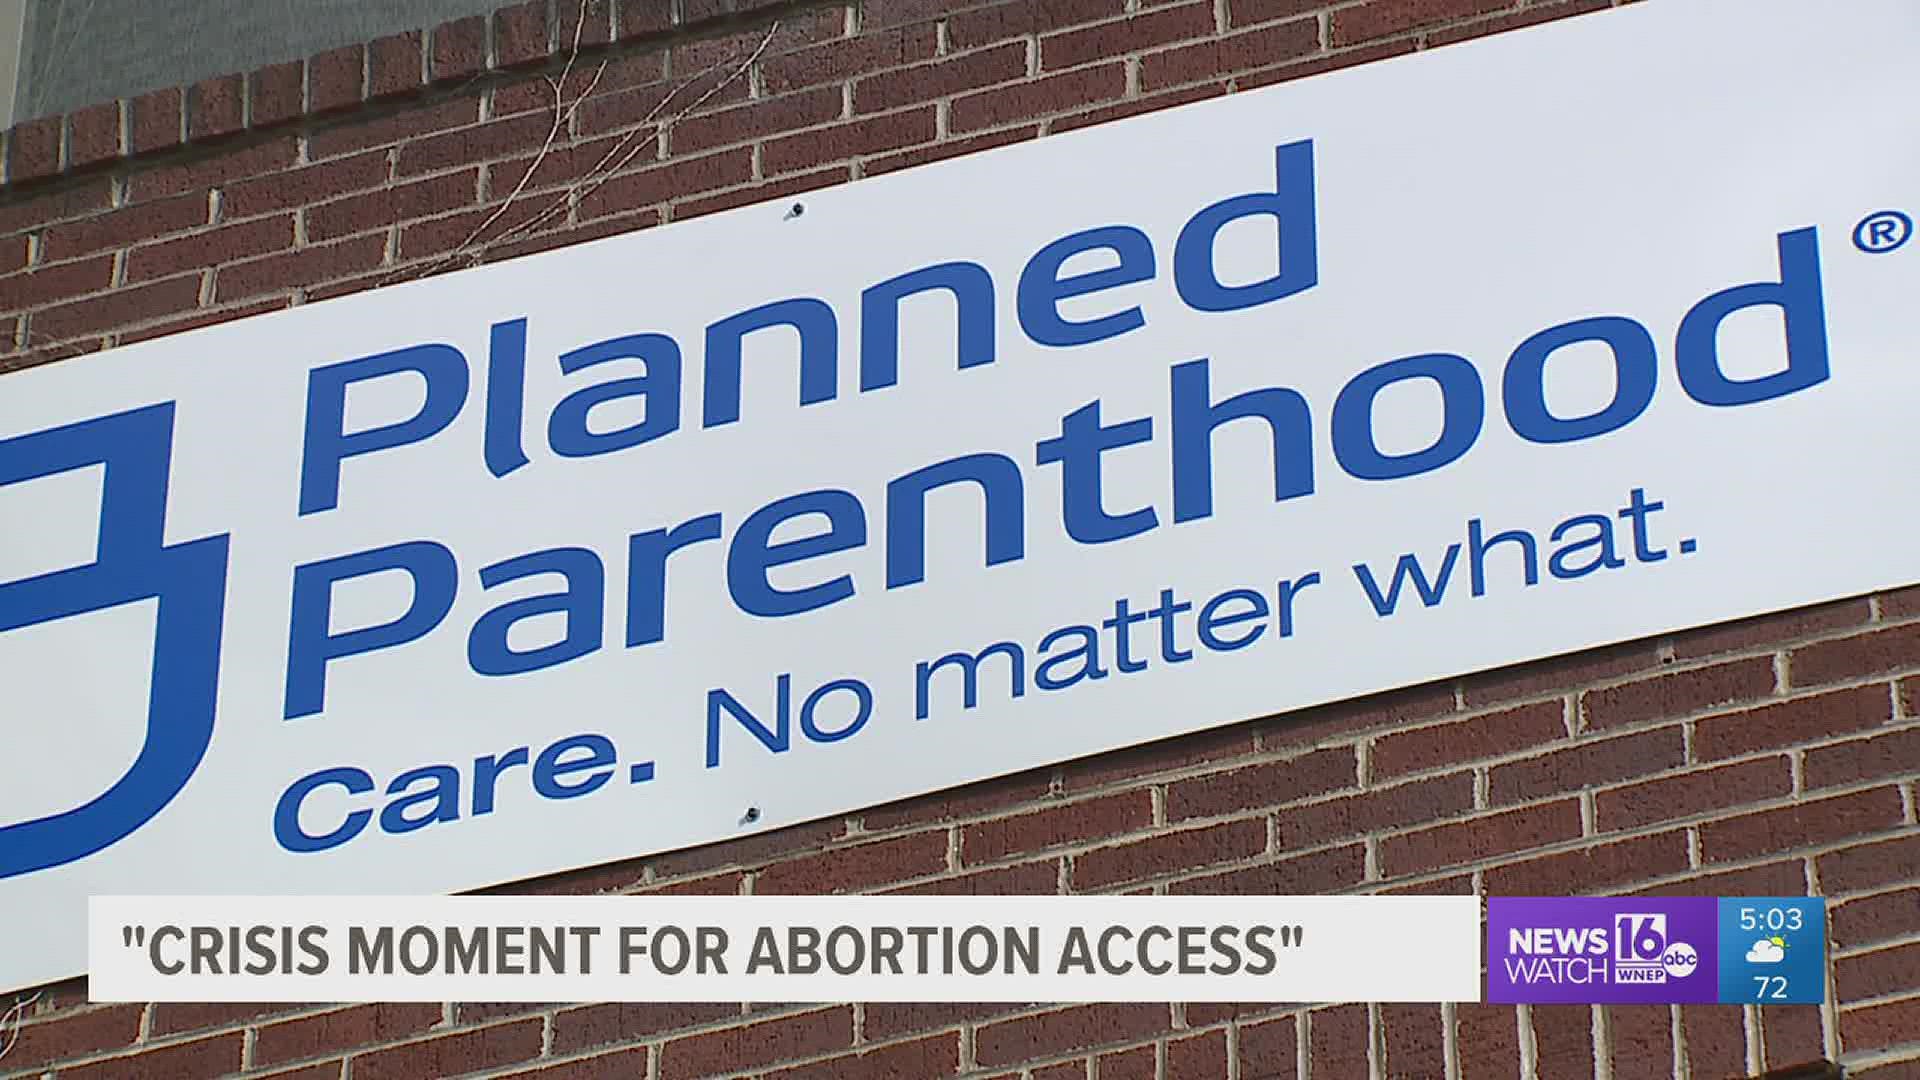 Newswatch 16's Courtney Harrison spoke with the president and CEO of Planned Parenthood Keystone about how overturning Roe V. Wade would affect them.